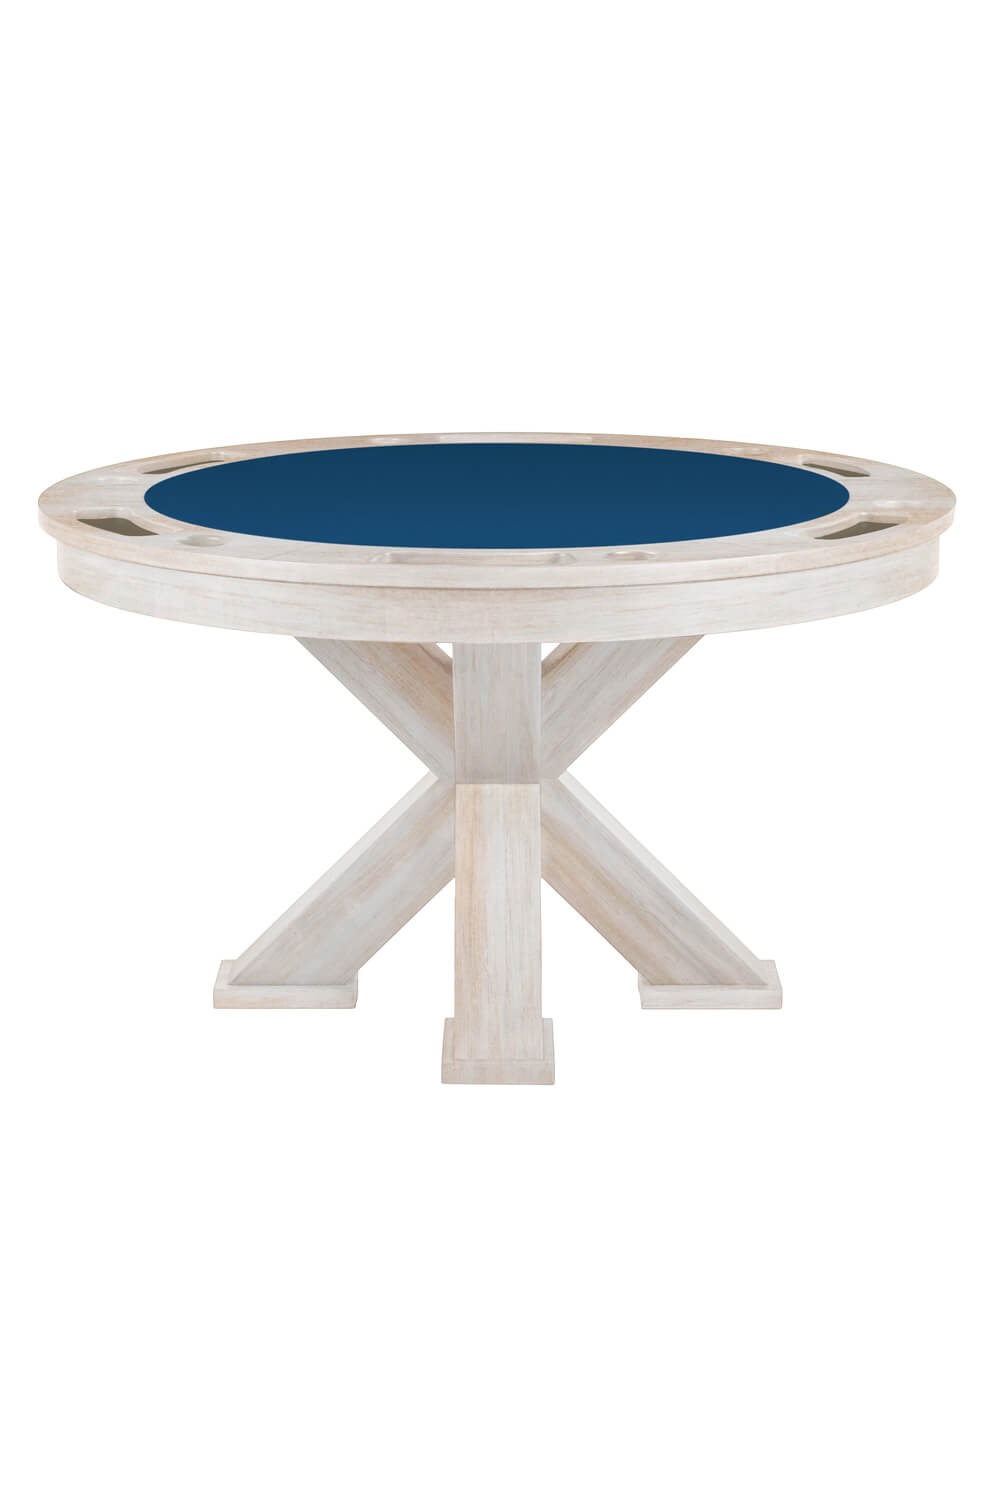 Darafeev's Duke Rustic Driftwood Round Poker Dining Table with Blue Felt Top